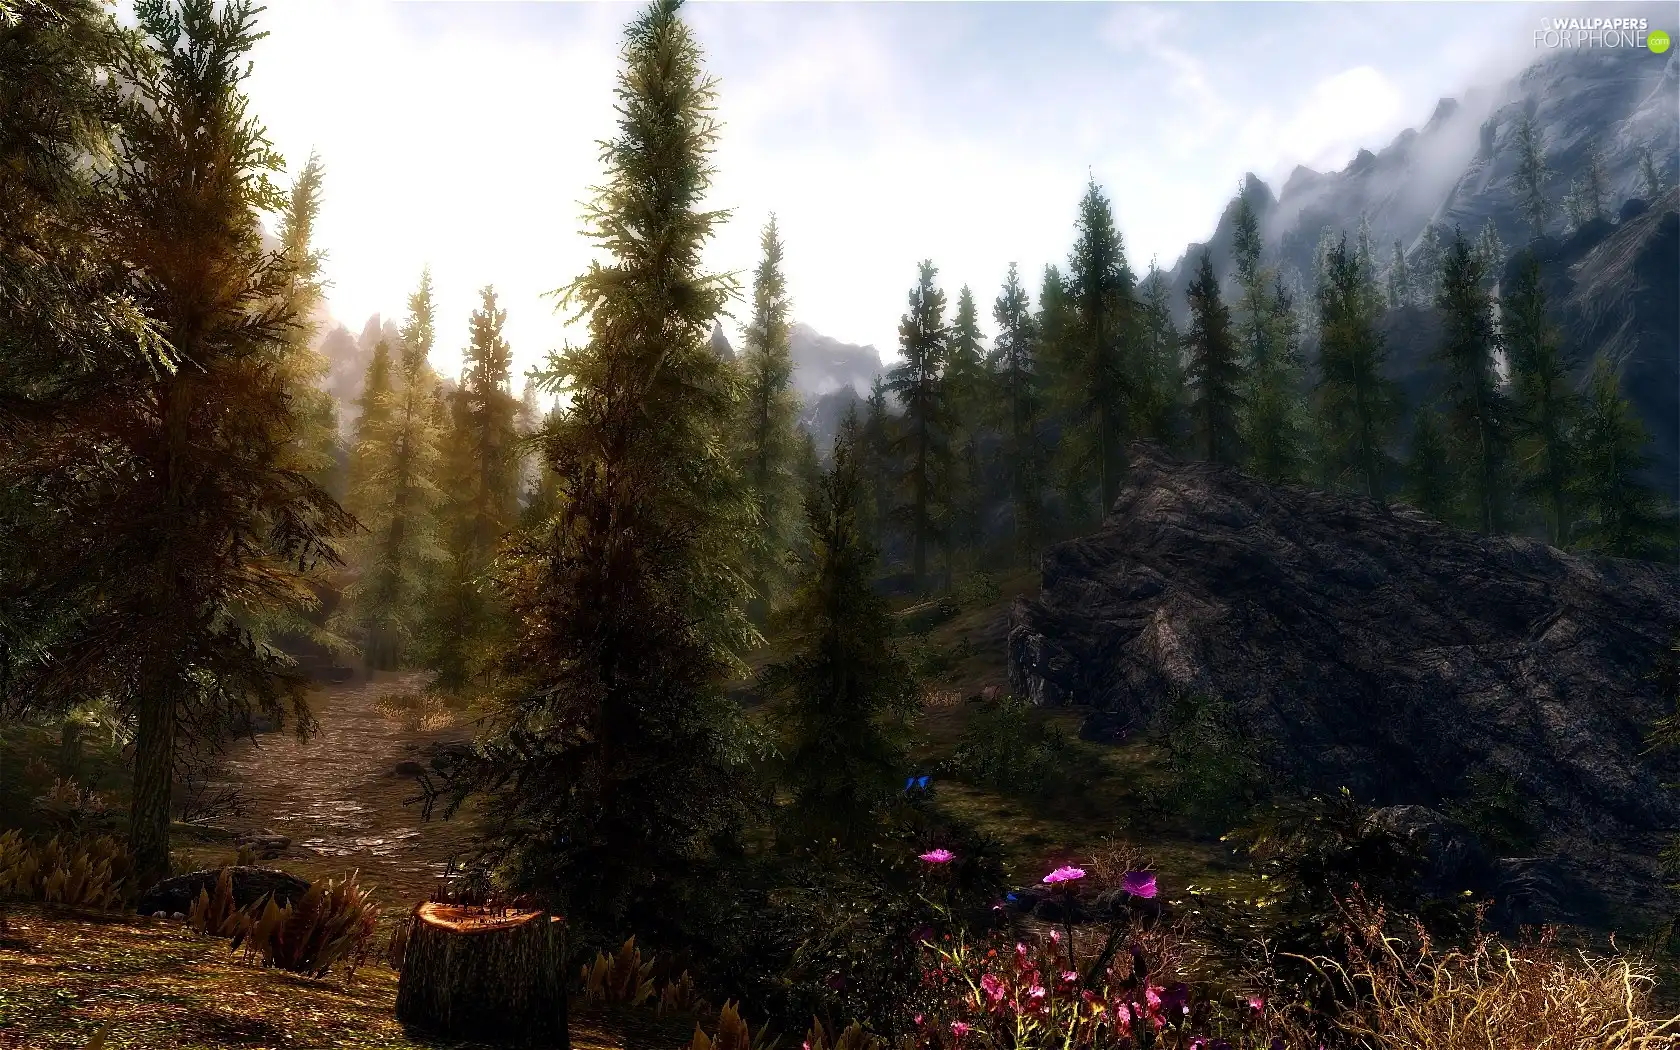 Conifers, Flowers, trees, viewes, Mountains